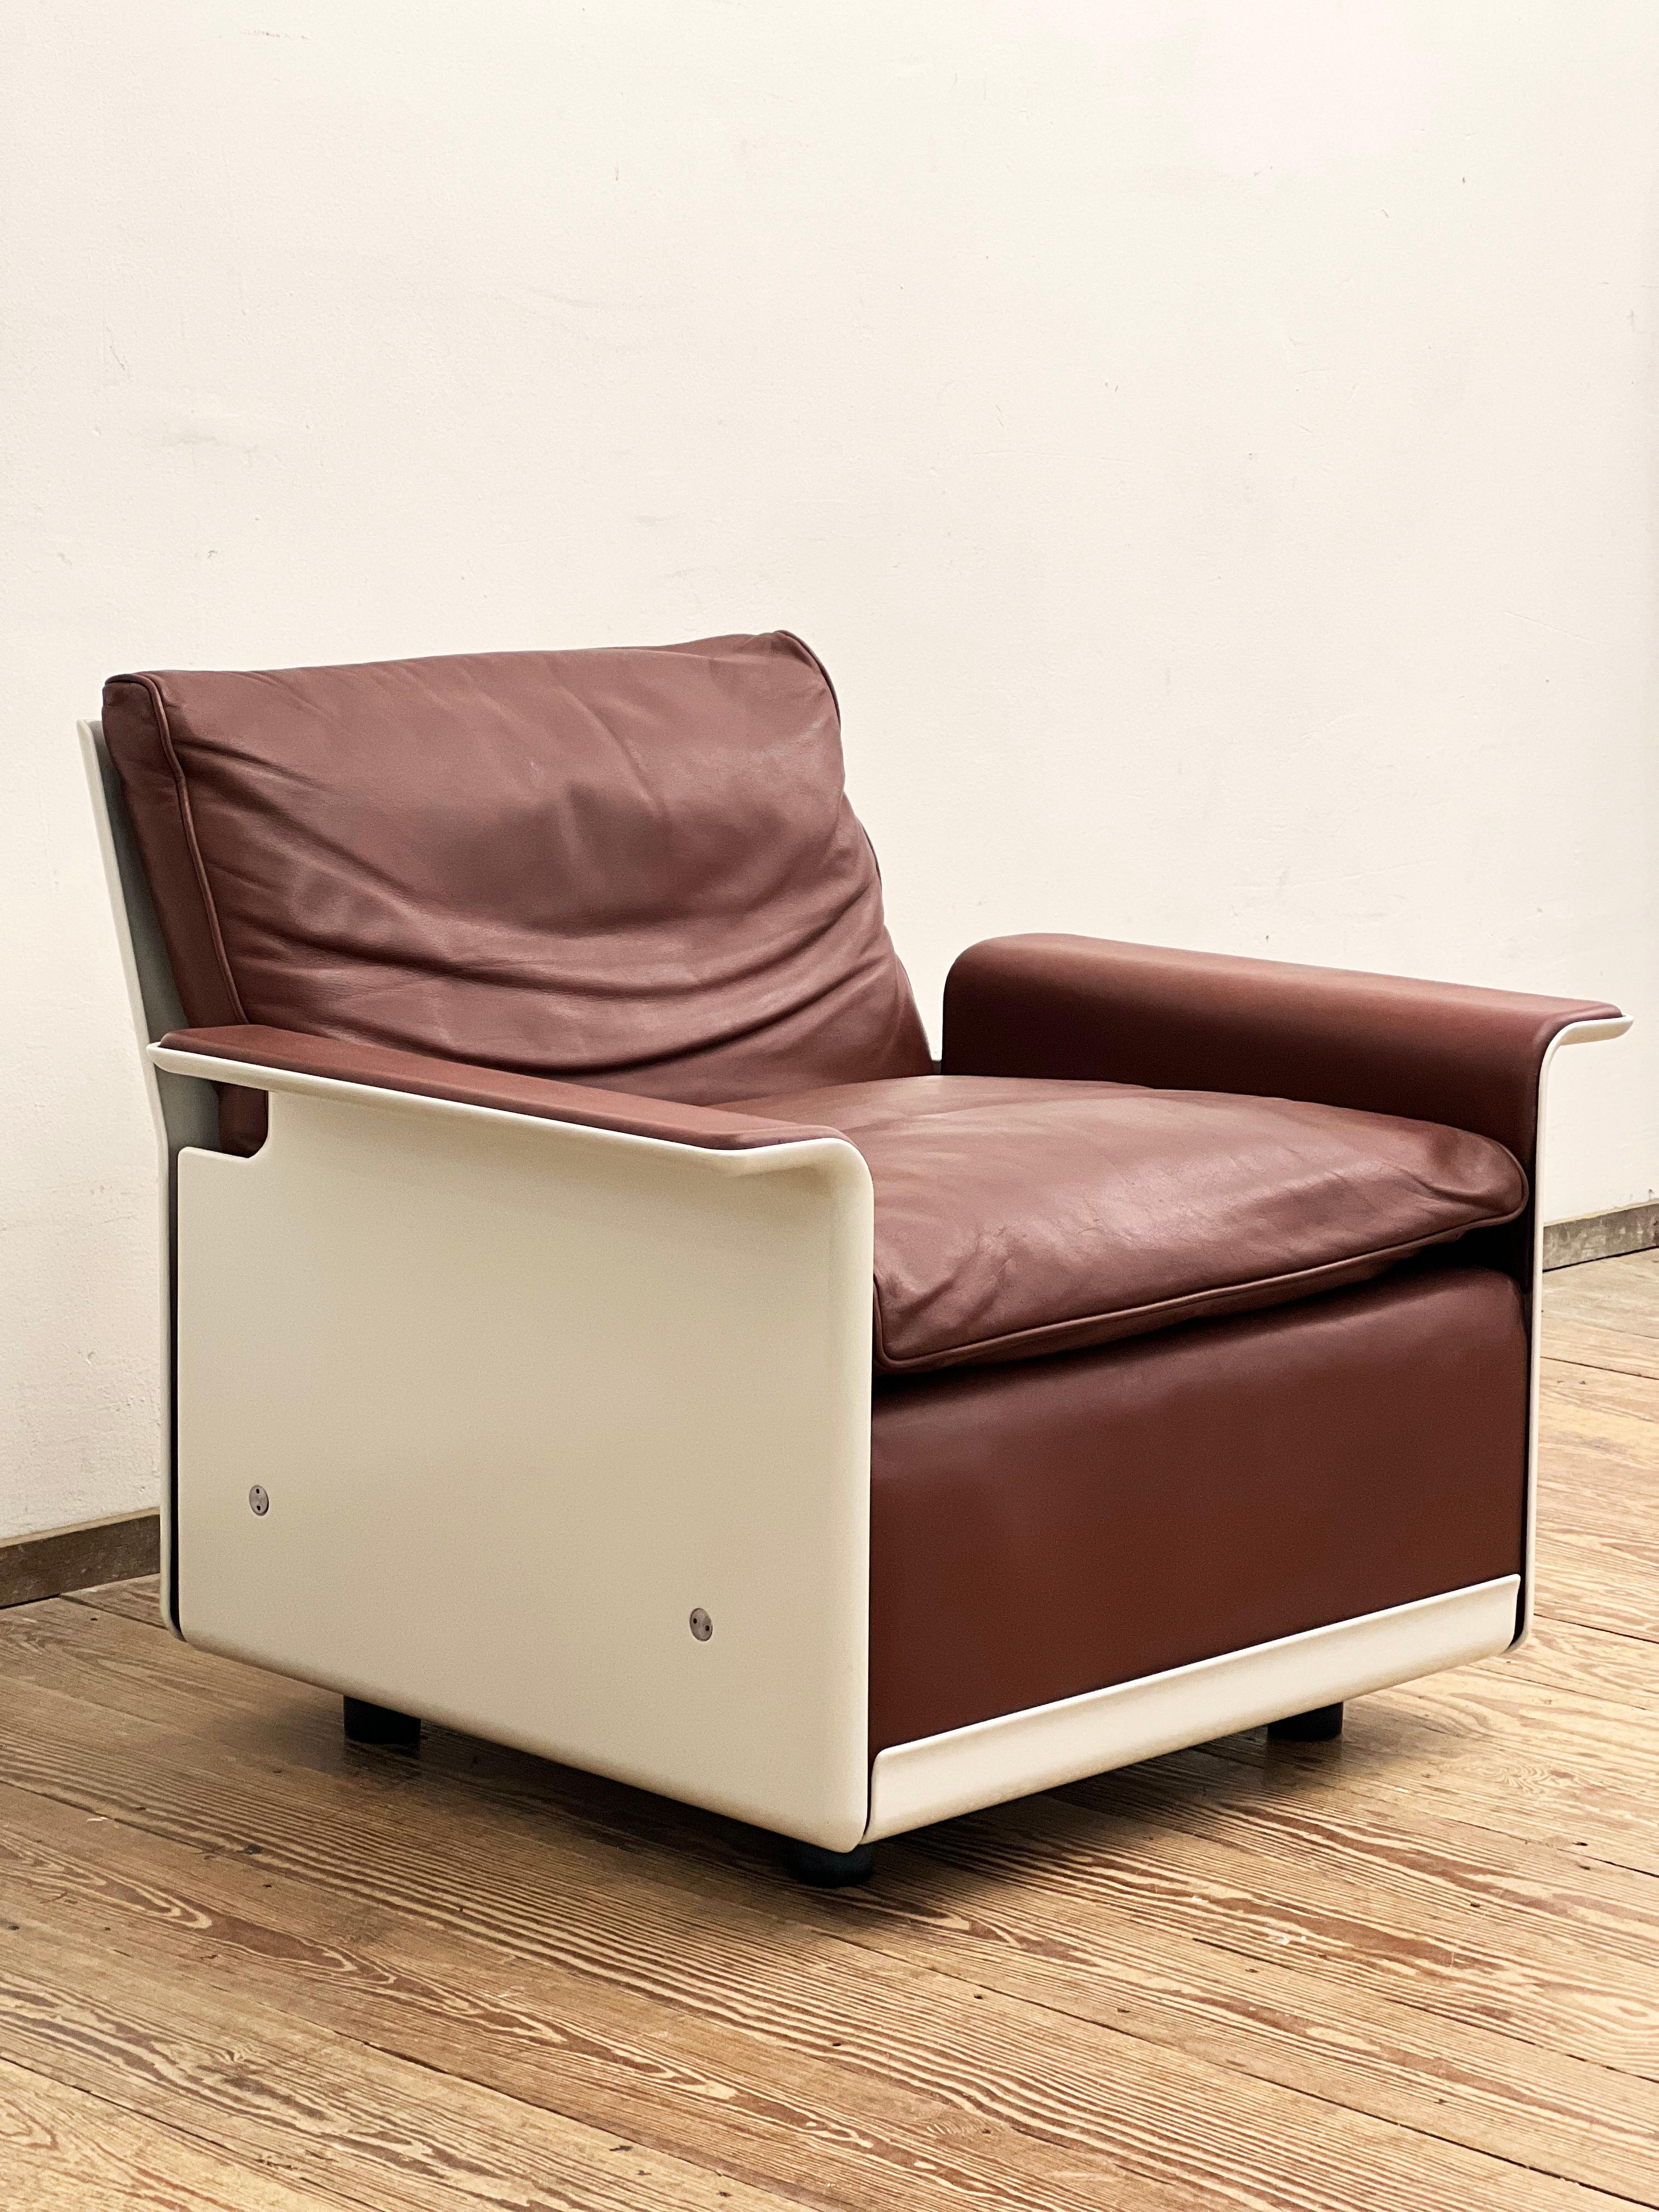 Mid-Century Lounge or Armchair by Dieter Rams for Vitsoe, German Design, 1960s For Sale 1